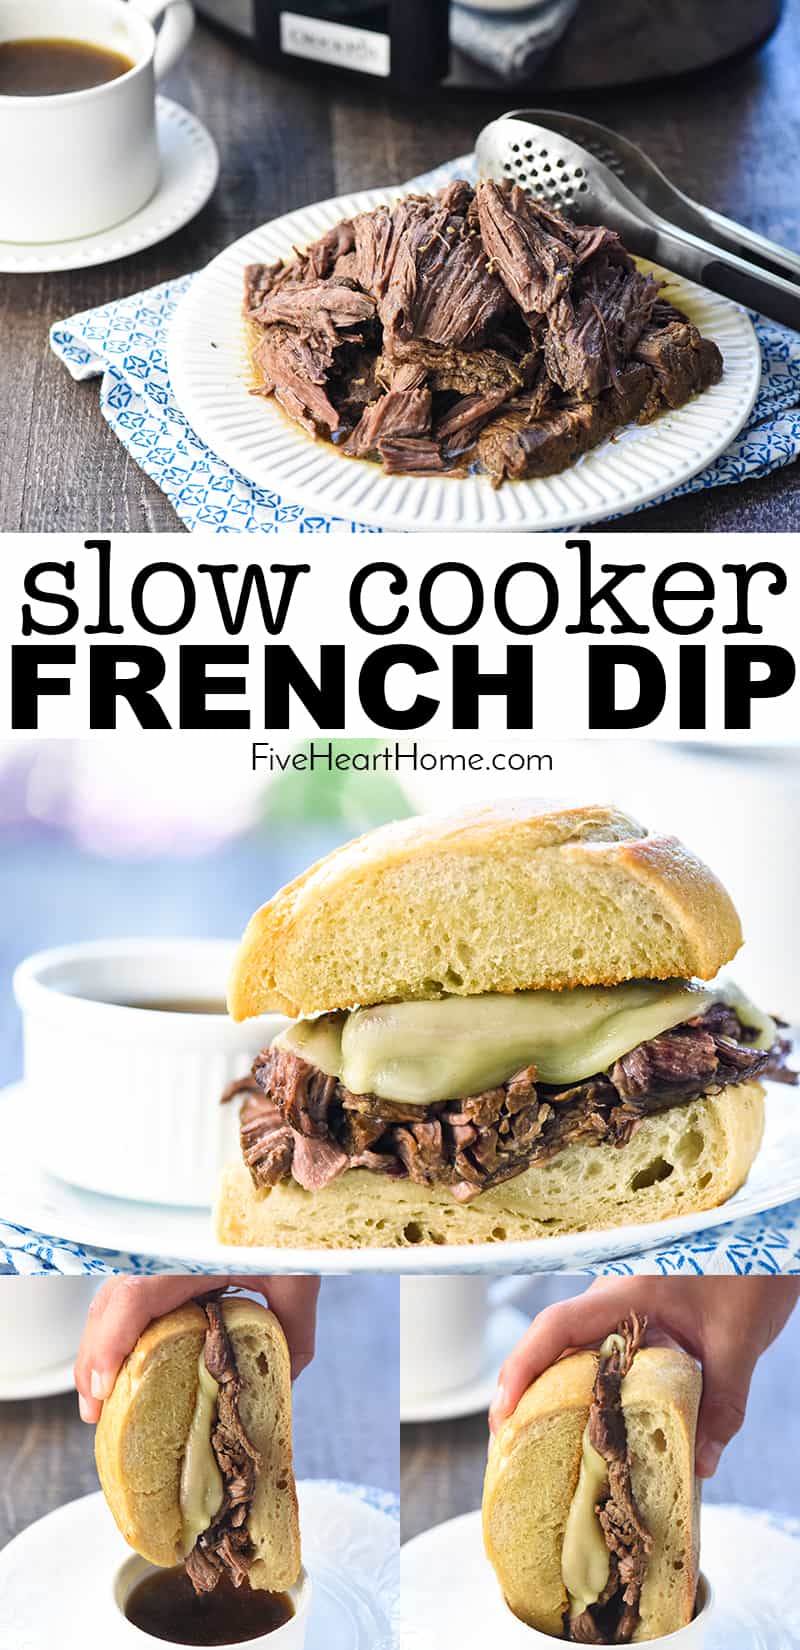 Slow Cooker French Dip ~ this crock pot recipe features succulent beef slow cooked in a flavorful broth, served on toasty rolls with melted cheese and extra au jus for dipping! | FiveHeartHome.com via @fivehearthome